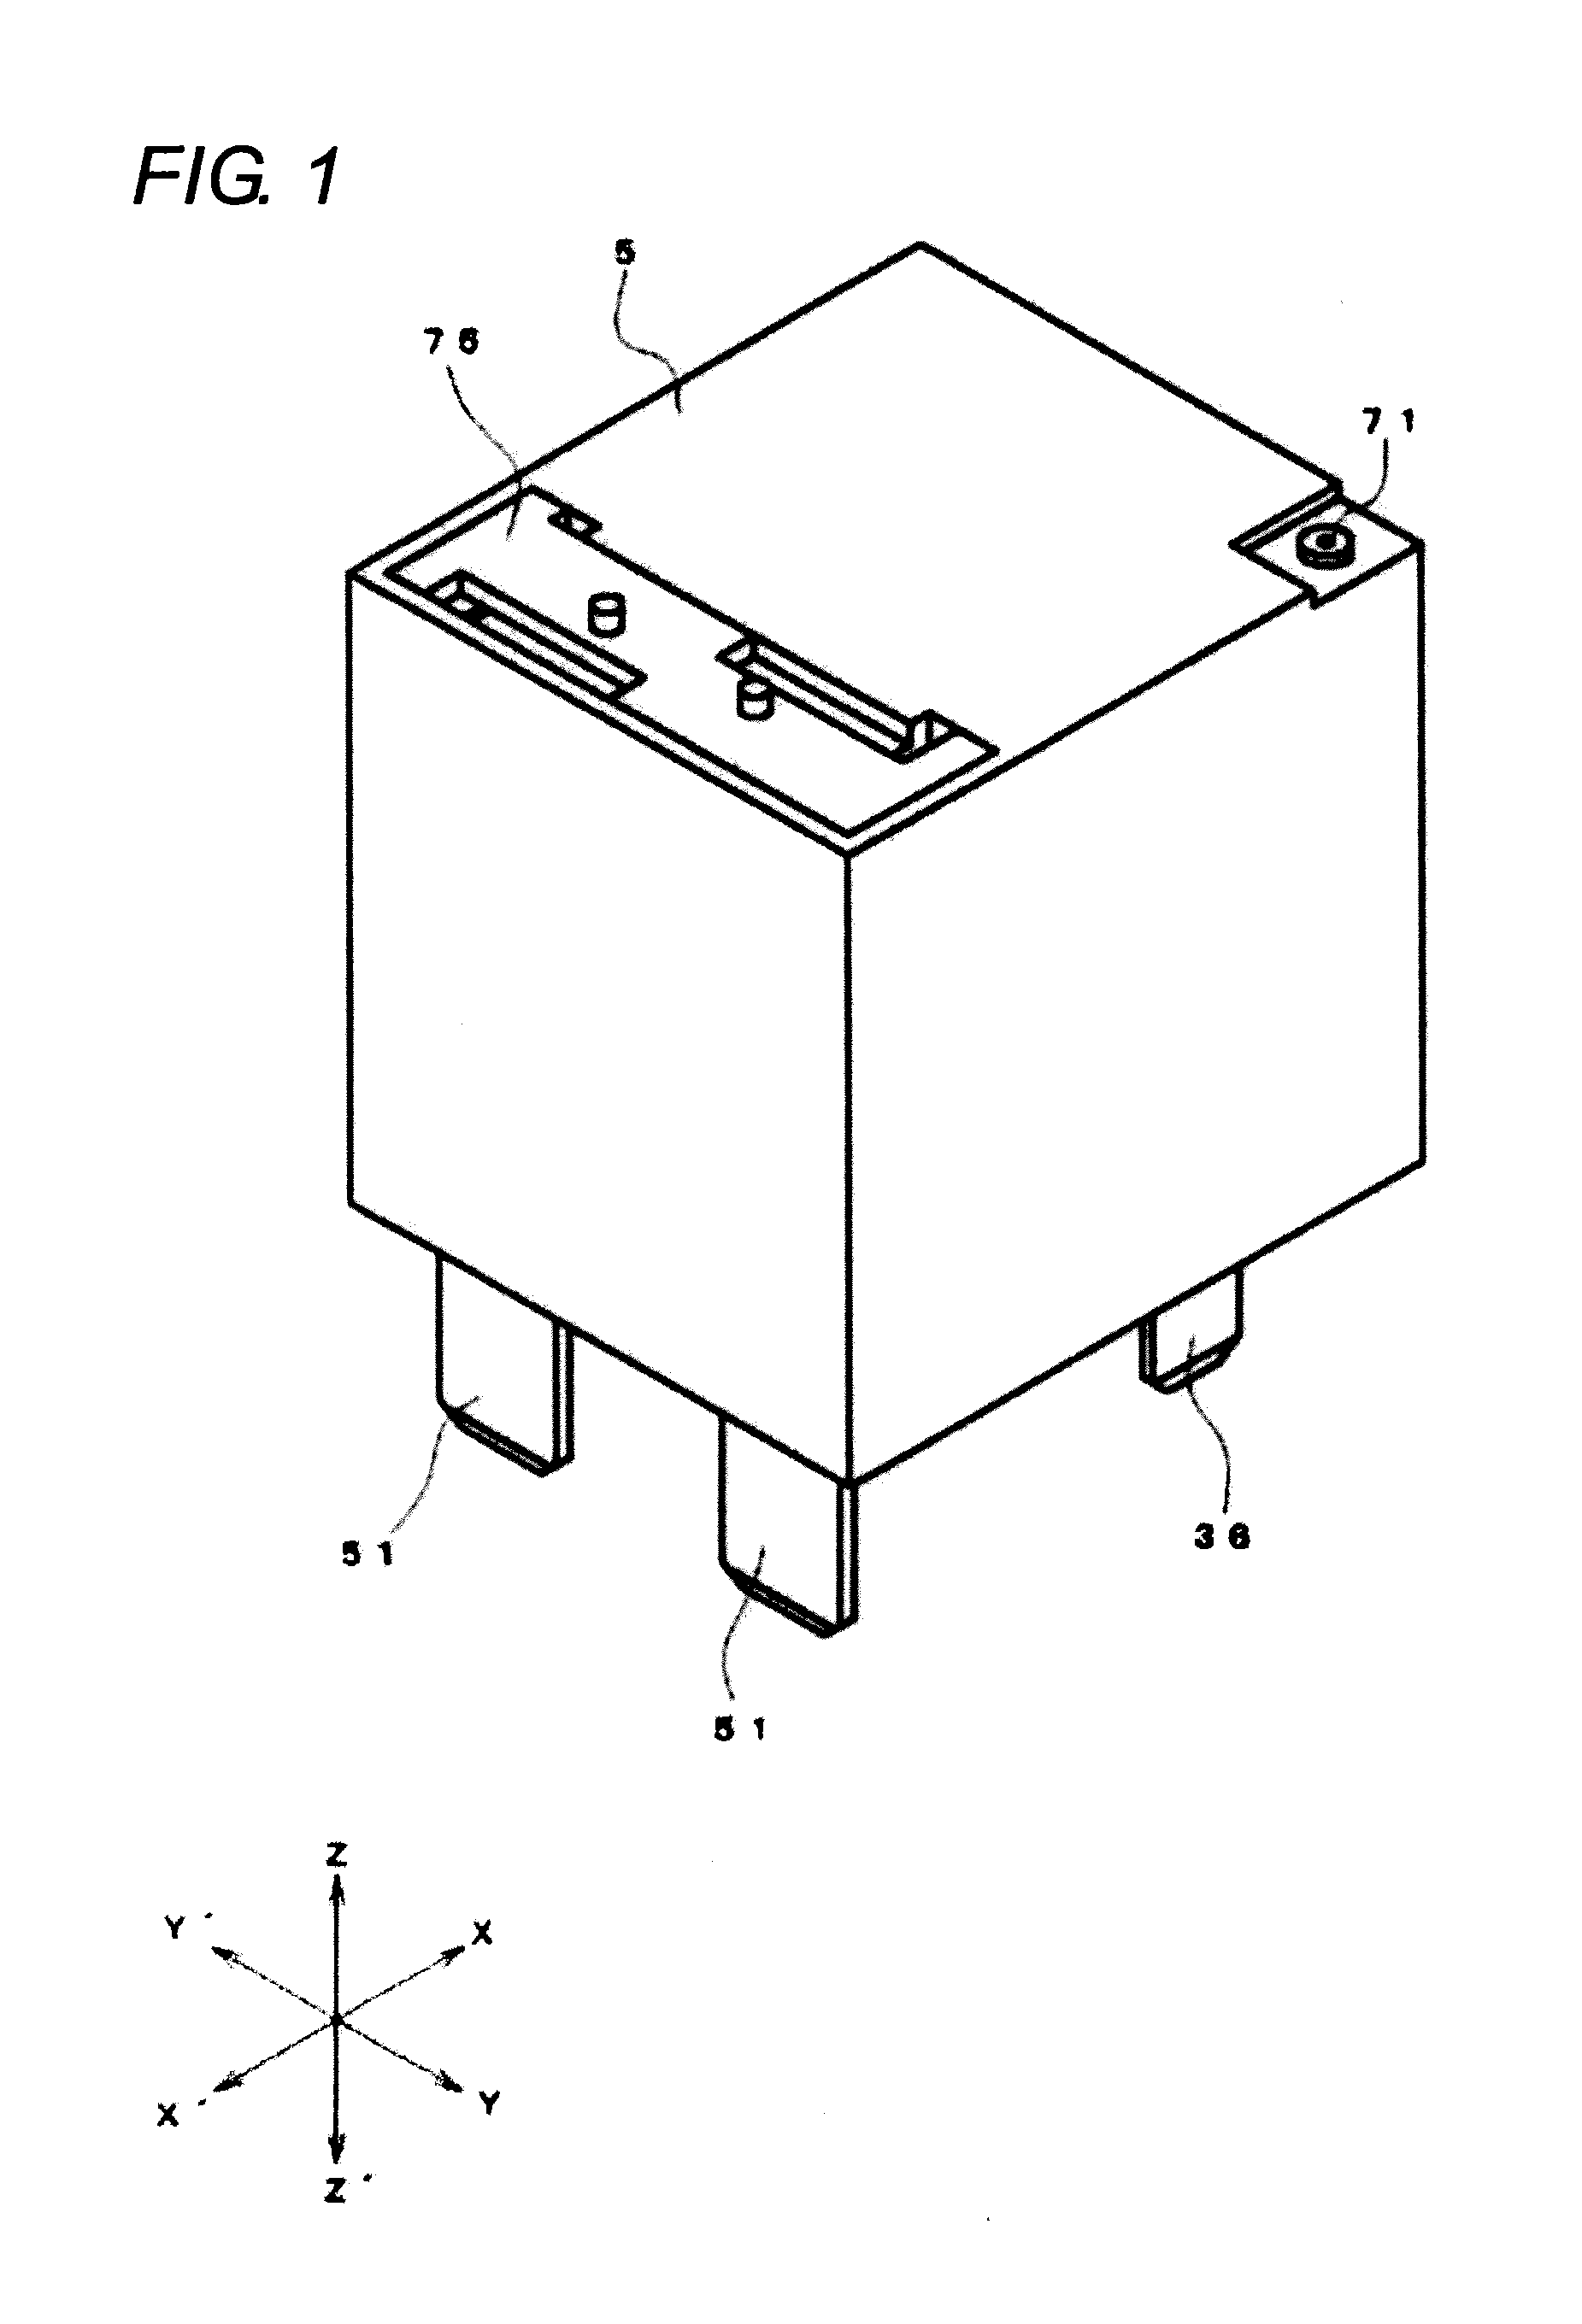 Contact switching mechanism and electromagnetic relay